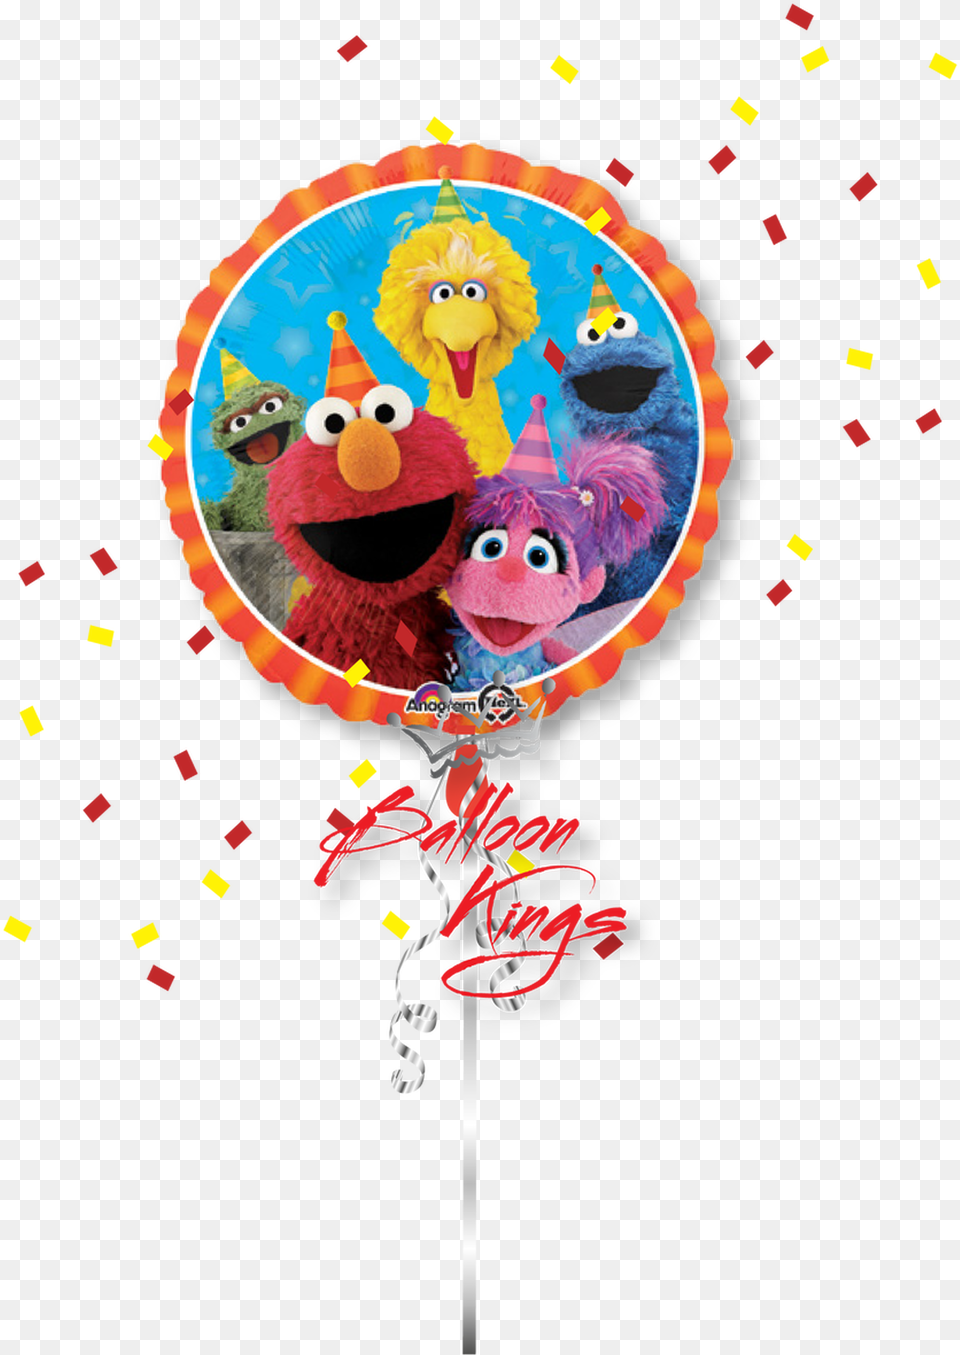 Sesame Street Group Sesame Street Balloon, Food, Sweets, Candy, Toy Png